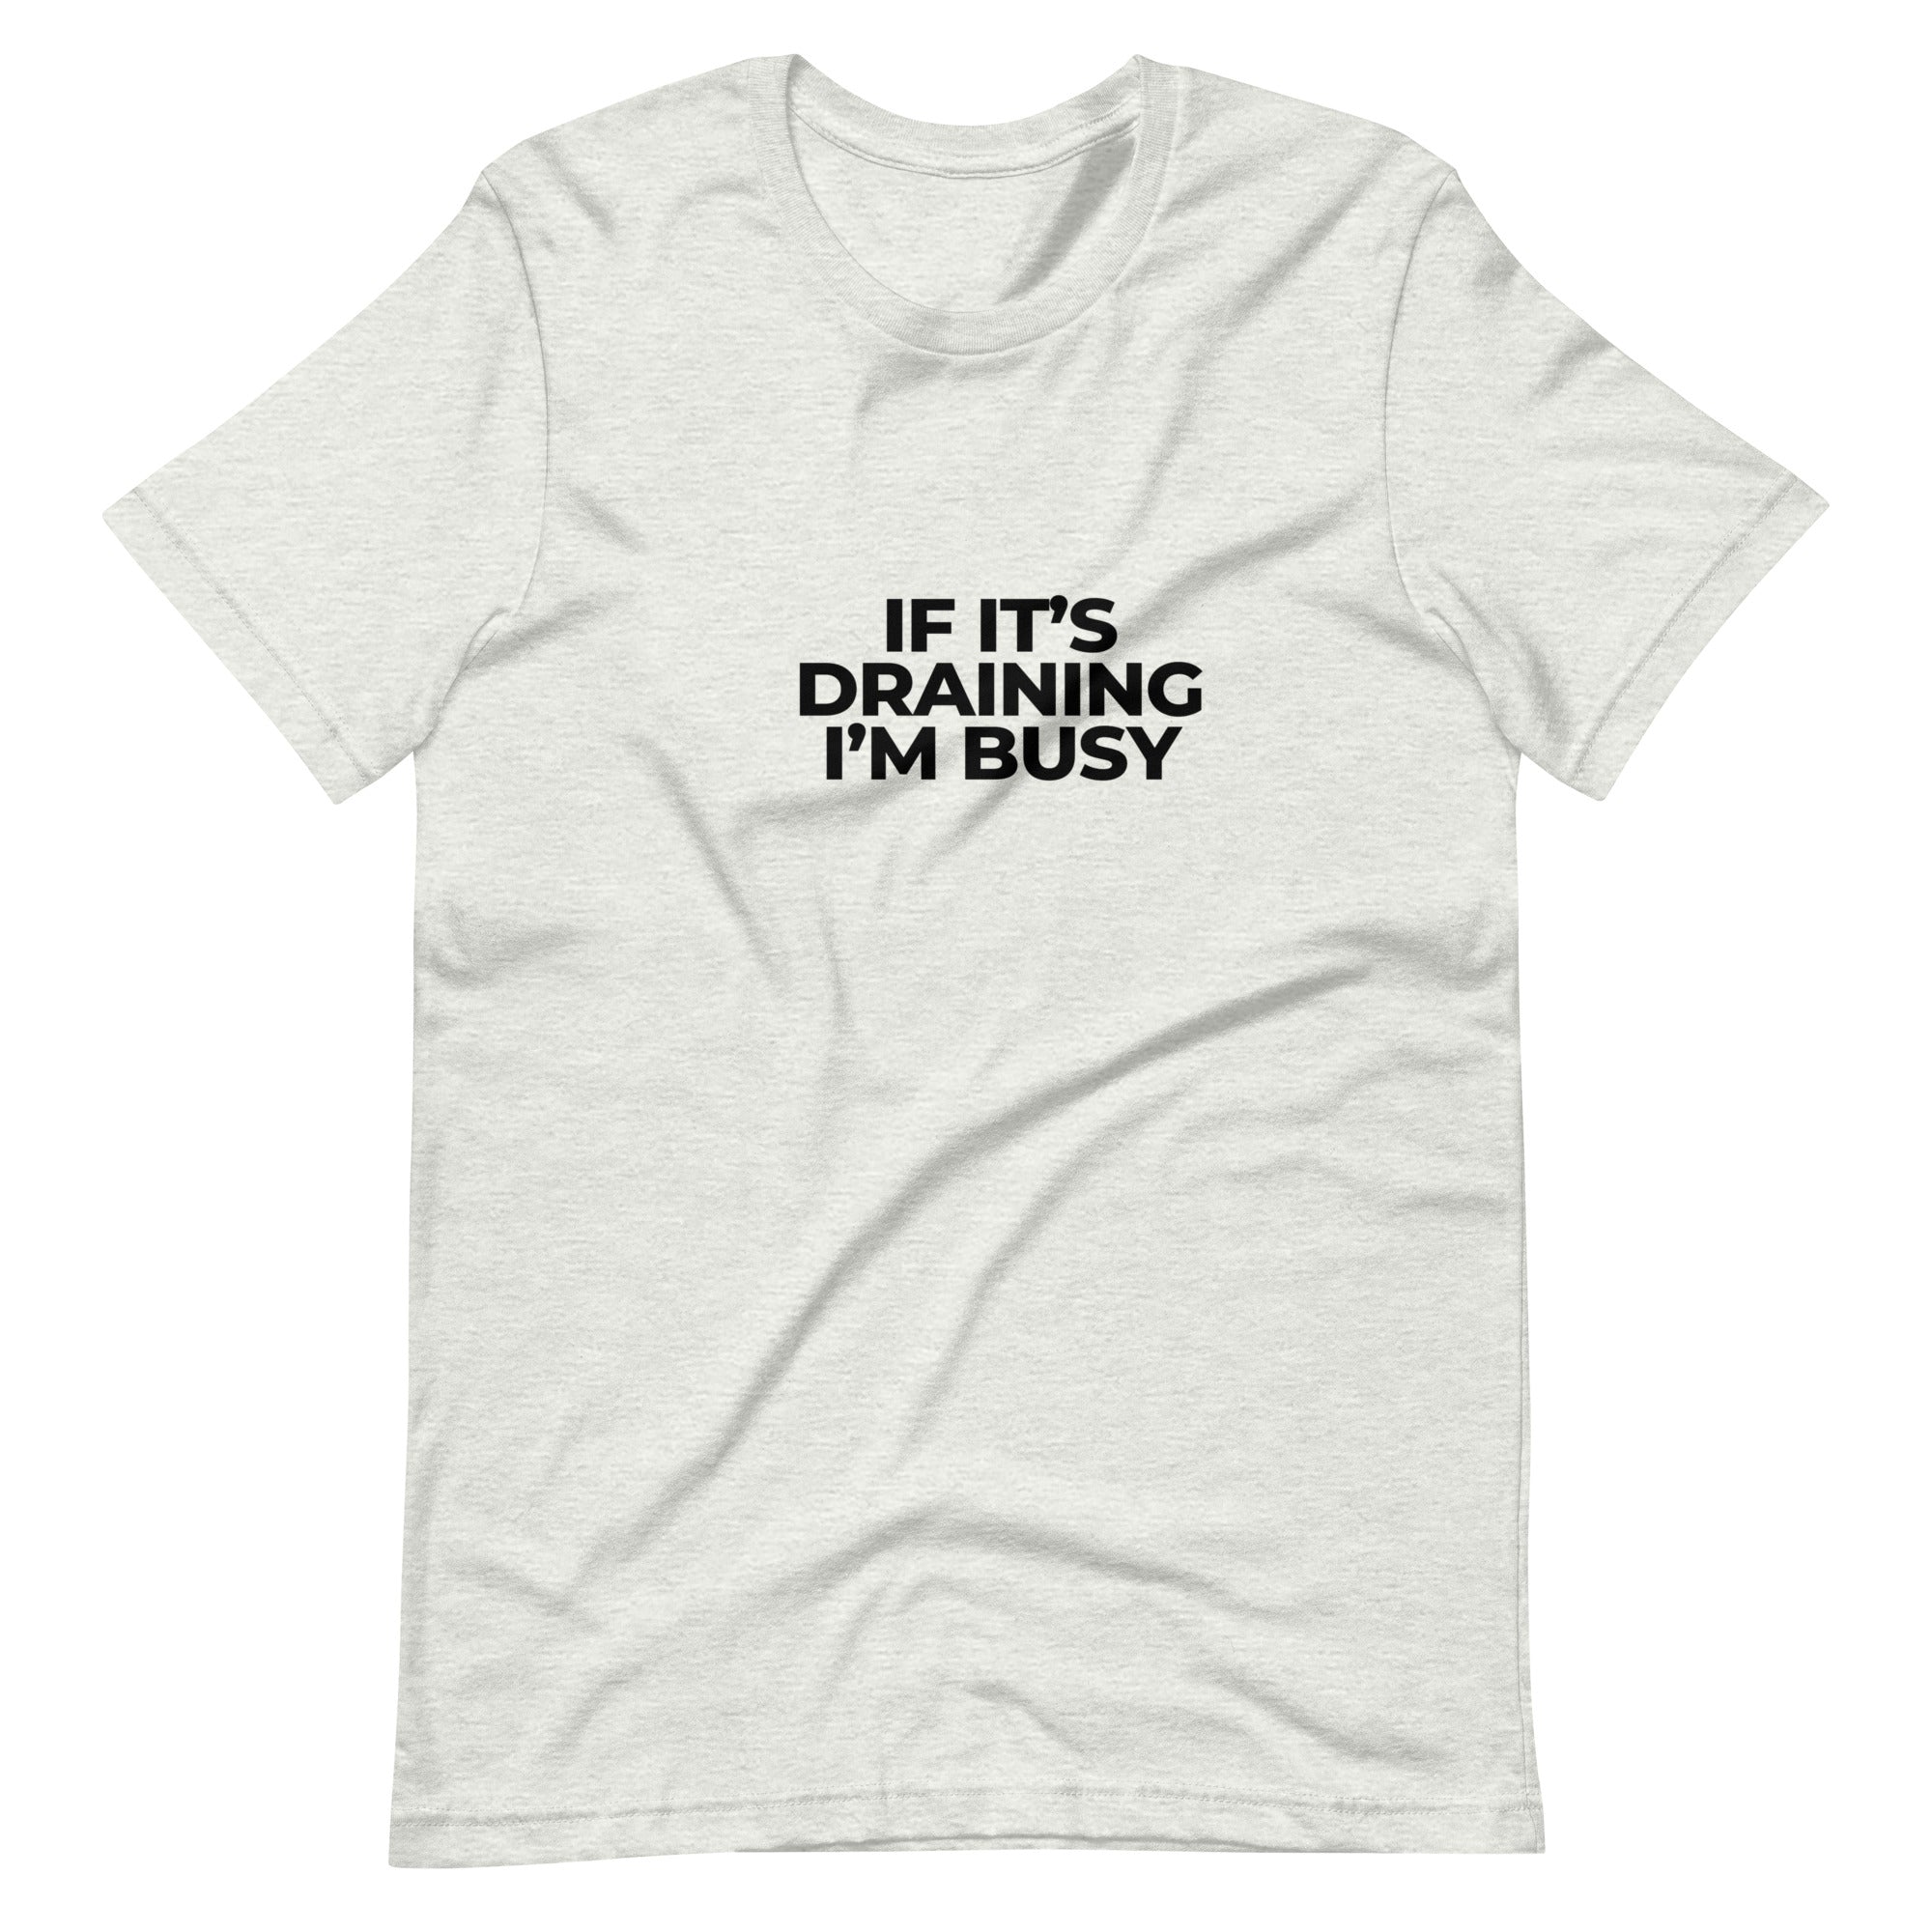 Adult Unisex "If It's  Draining, I'm Busy" T-Shirt